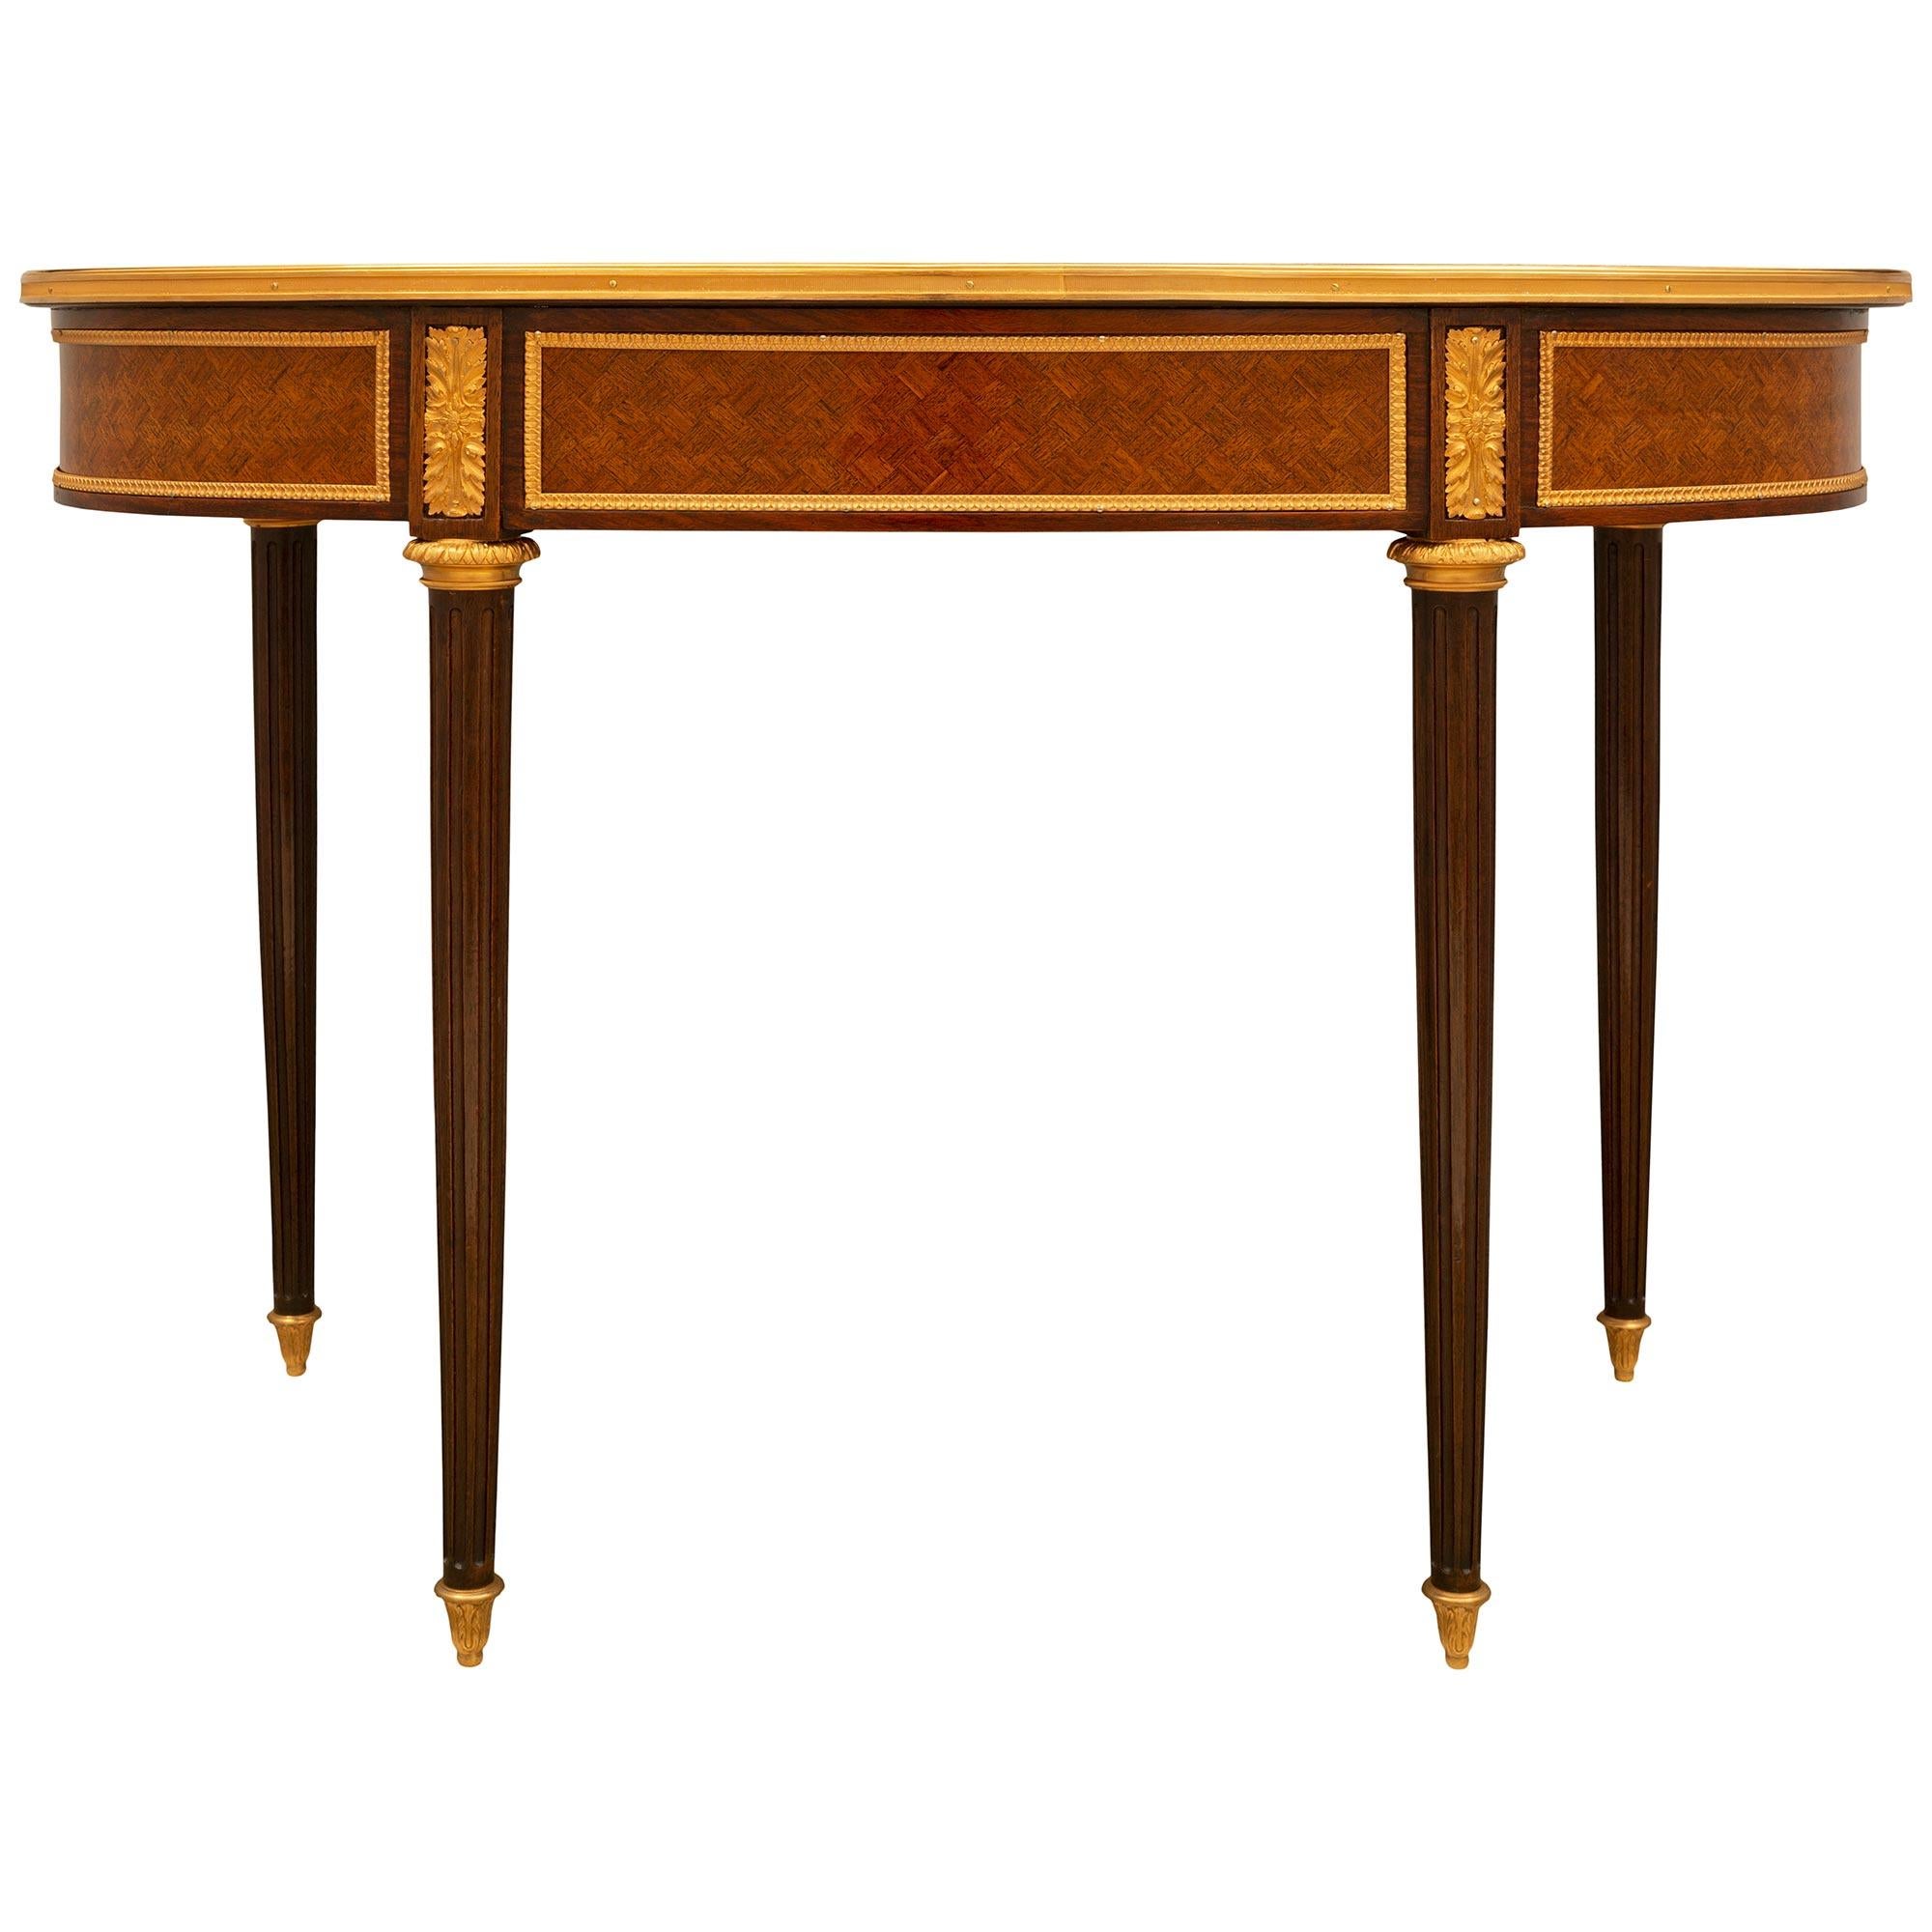 French 19th Century Tulipwood Parquetry Desk, Attributed to Linke For Sale 7